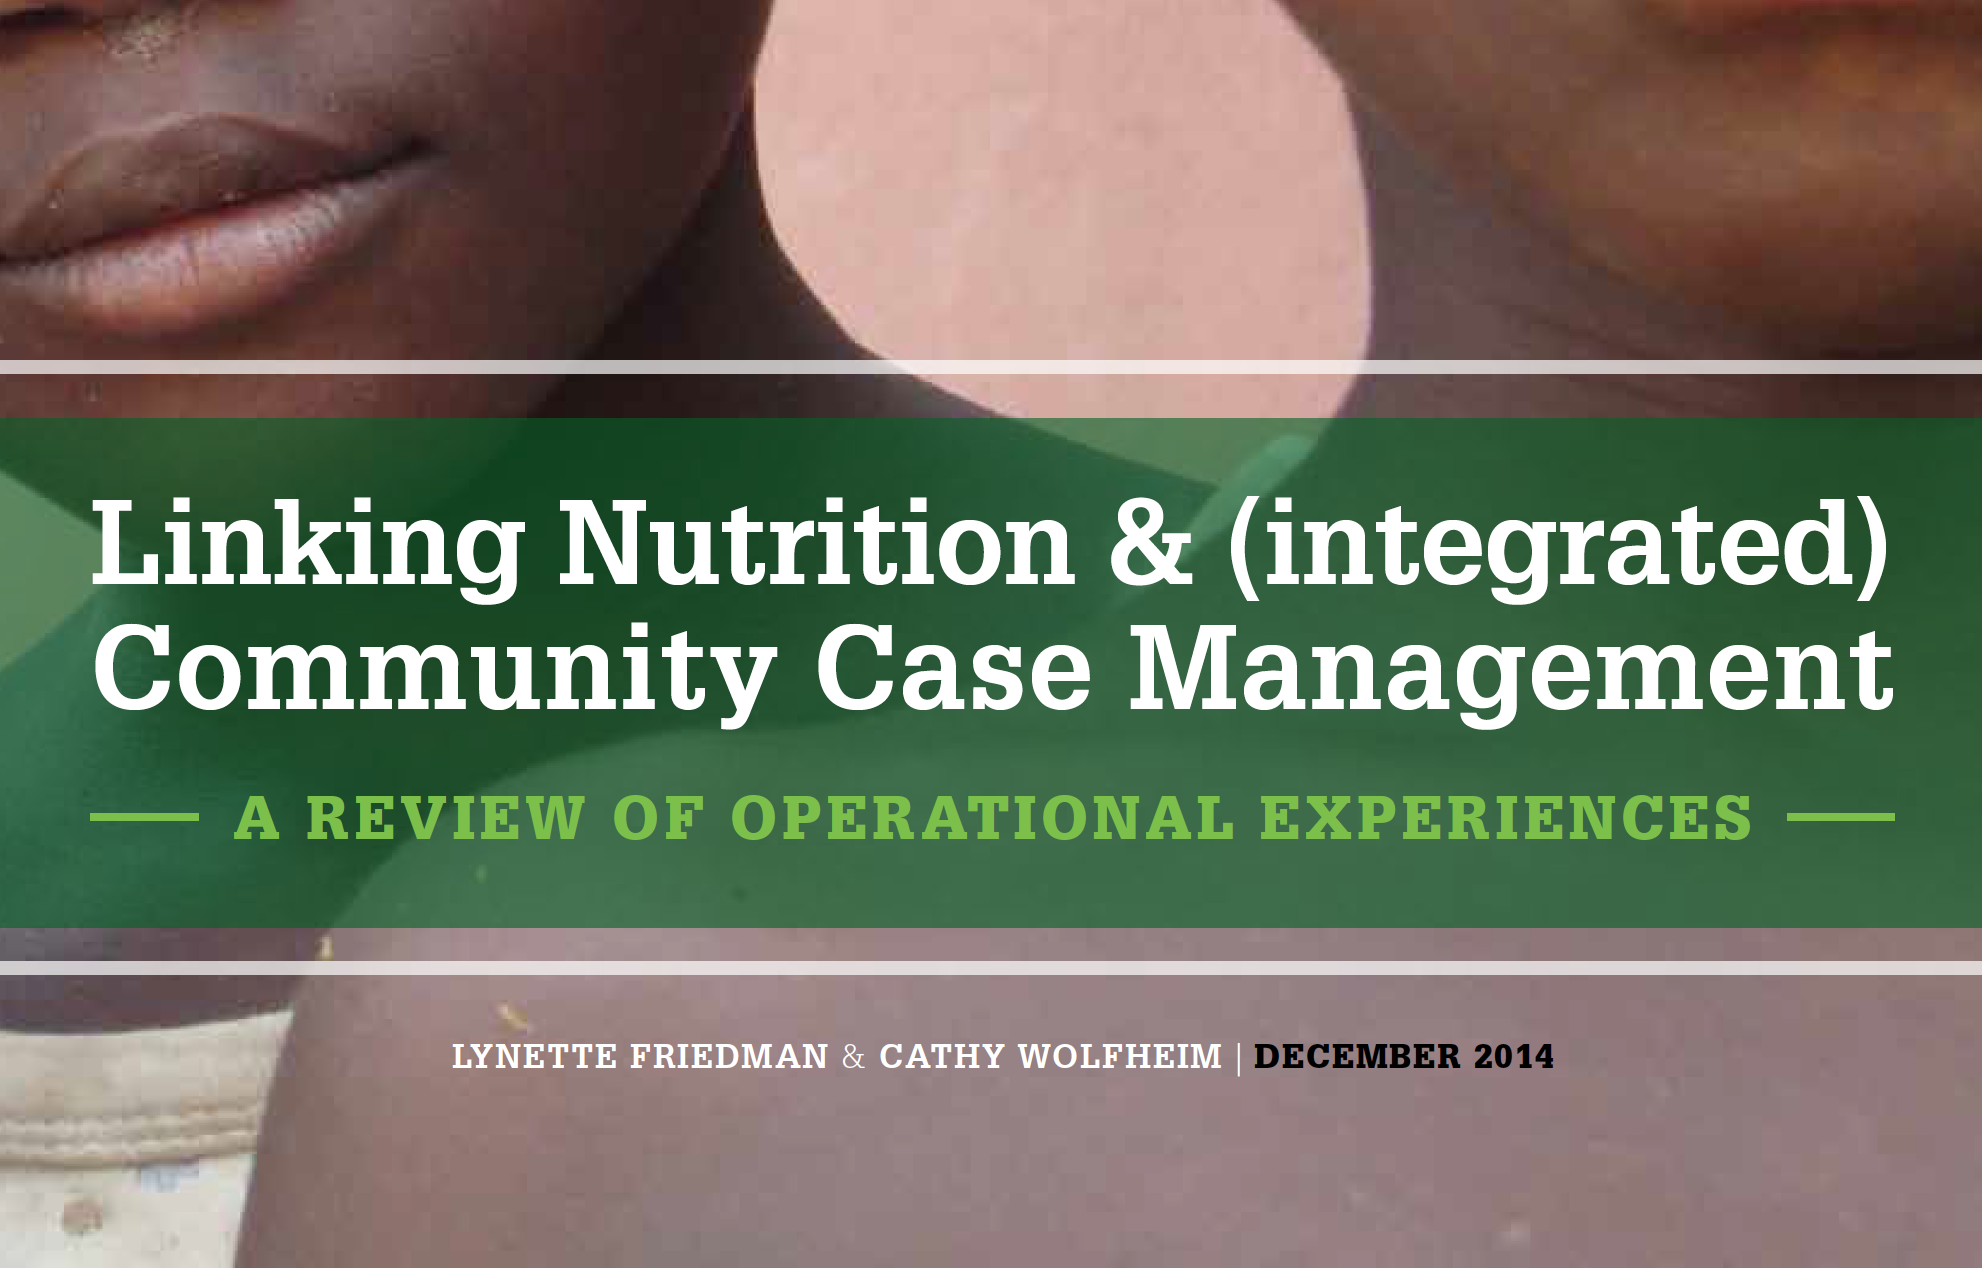 Photo: Lynette Freidman and Cathy Wolfheim_Linking iCCM and Nutrition Final Report_12.2014 cover